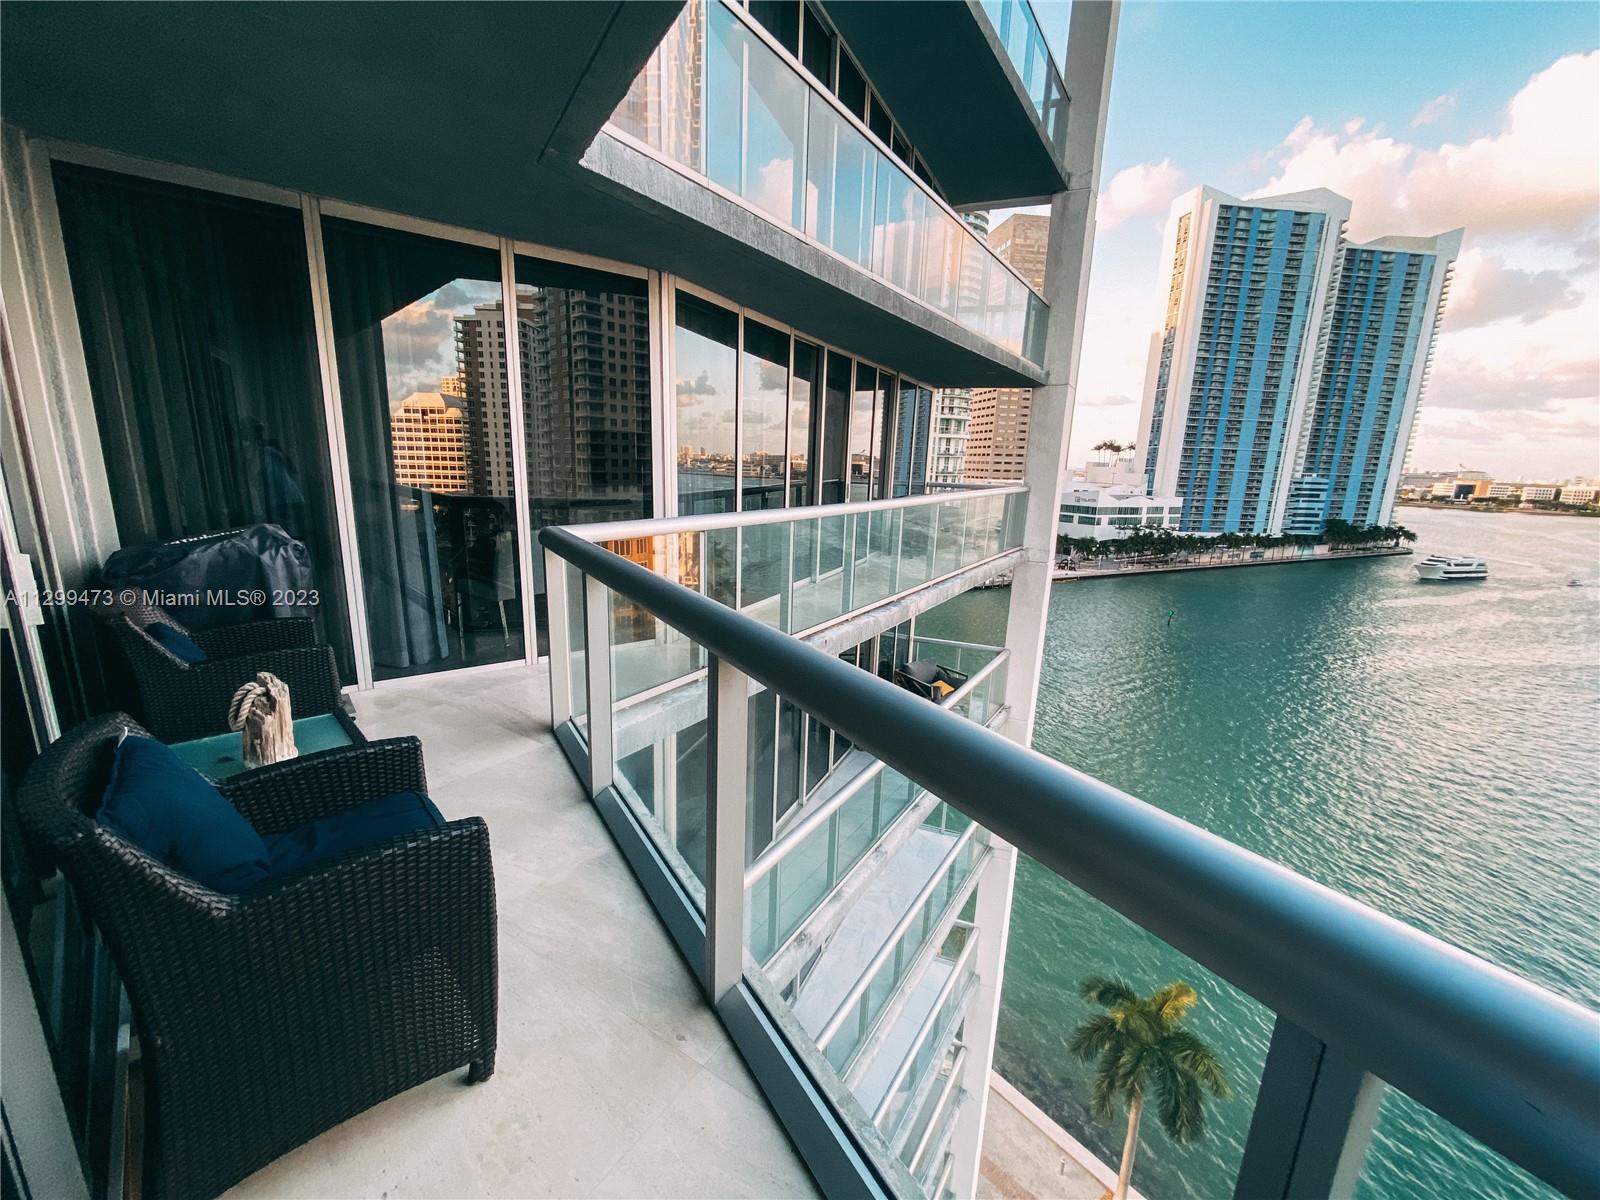 COMPLETELY UPGRADED 3-BED CORNER BAY UNIT AT ICON BRICKELL. UNIT SITS DIRECTLY OVER THE MIAMI RIVER, GIVING IT A UNIQUE FEEL WITH DIRECT BAY AND RIVER VIEWS OF BRICKELL. THE UNIT HAS BEEN COMPLETELY UPGRADED WITH HIGH-END FINISHES SUCH AS MARBLE FLOORING, DROP CEILINGS, A BUILT-IN BAR & CUSTOM CLOSETS.